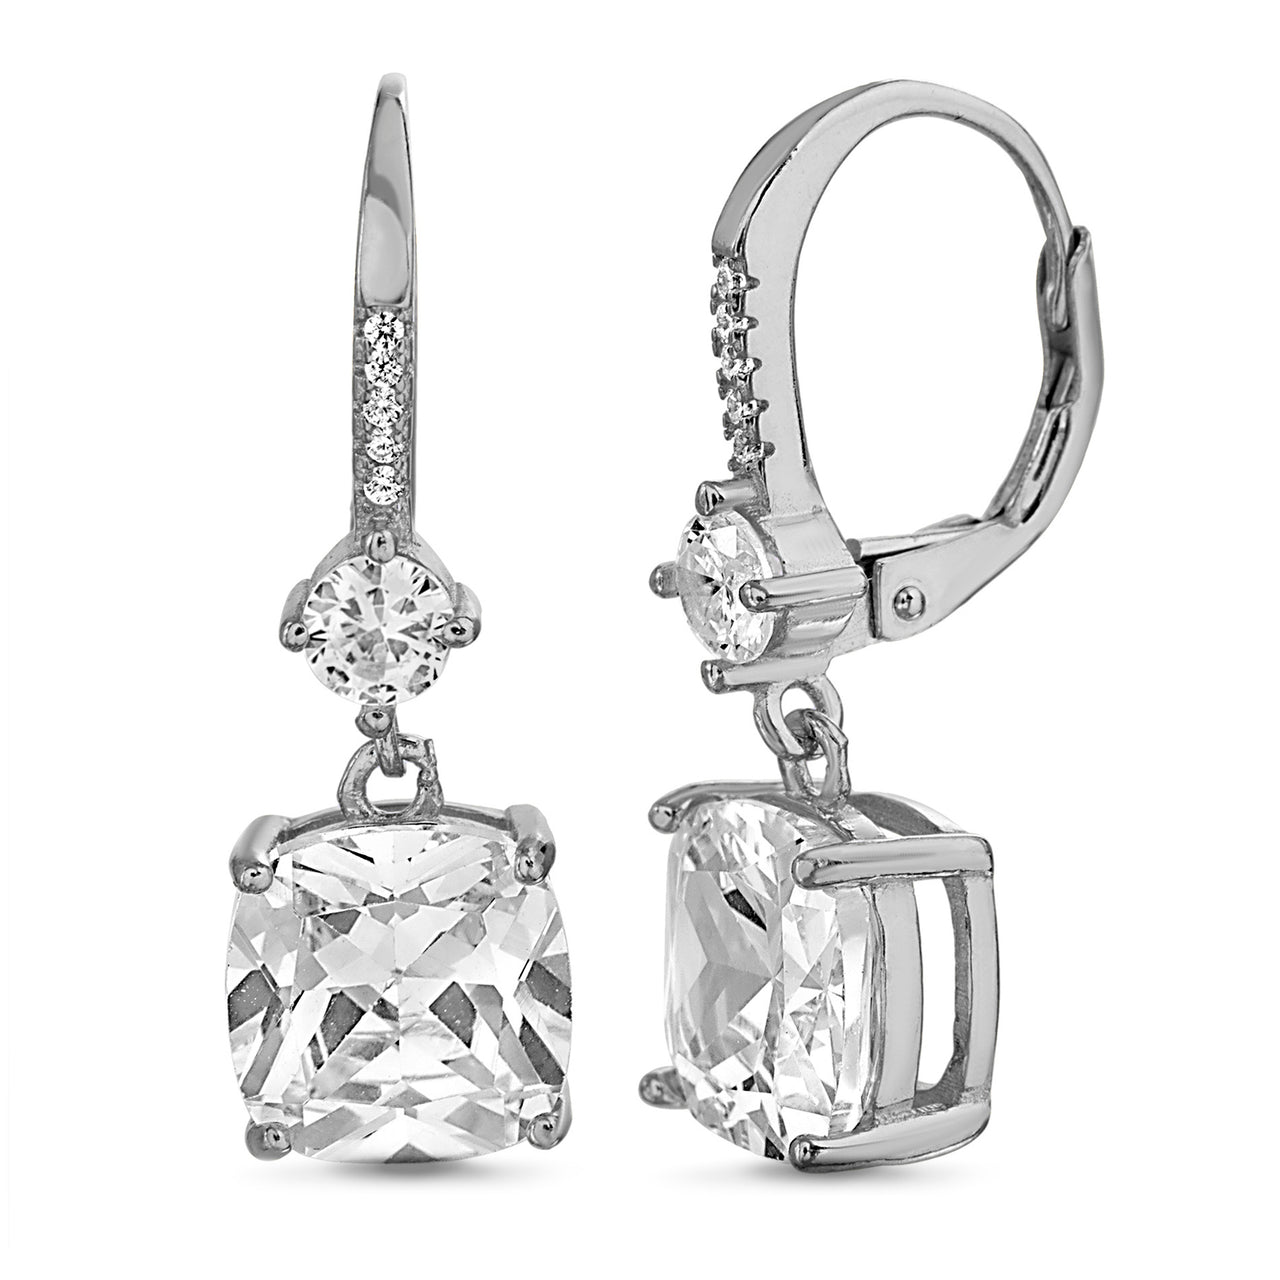 Lesa Michele Sterling Silver Square Cubic Zirconia Leverback Earrings